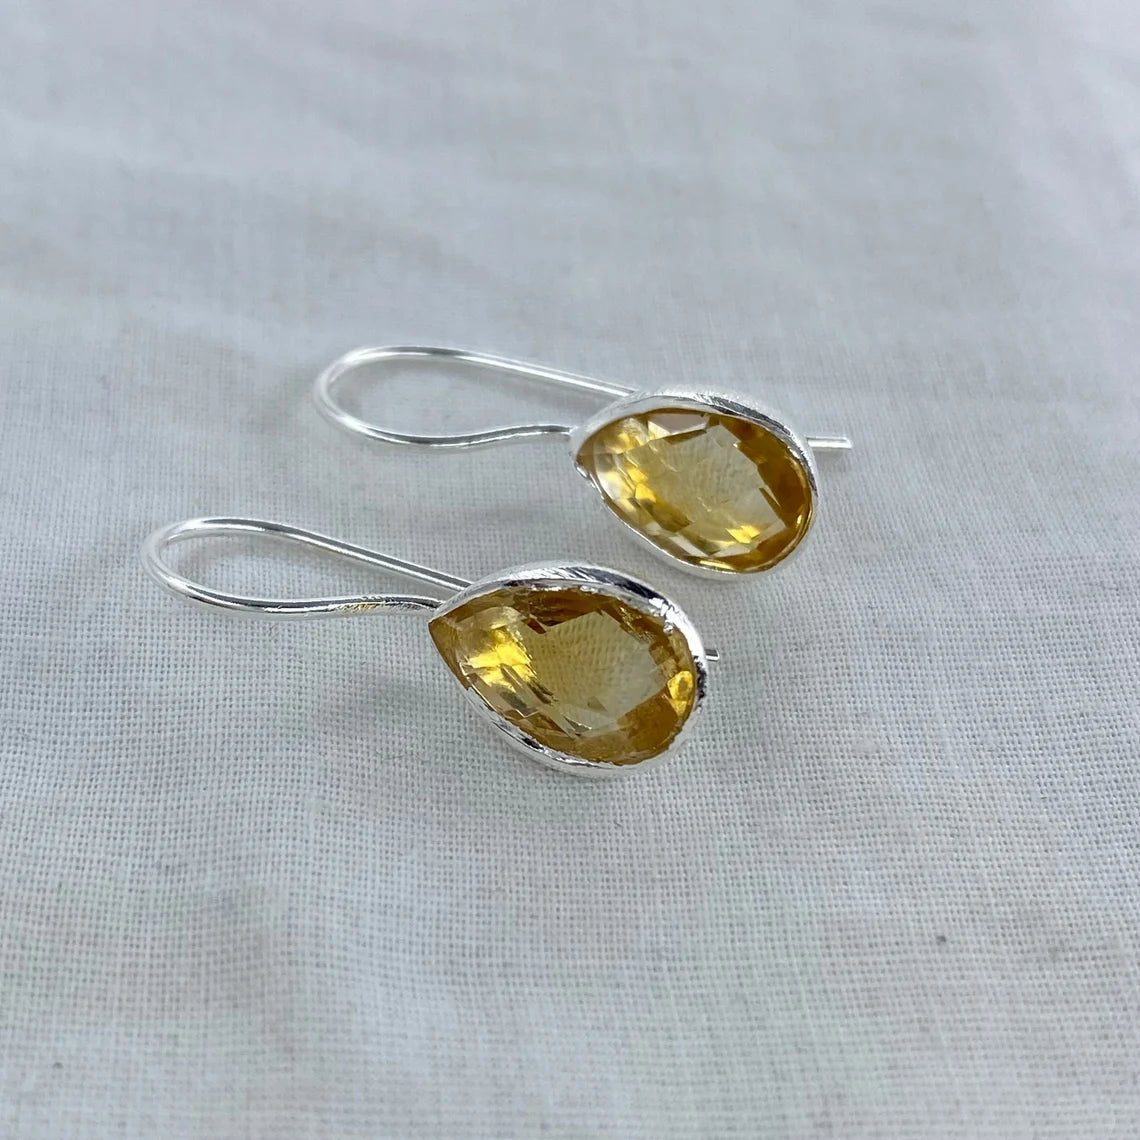 Citrine Earring - Solid Sterling Silver 925 Earring - Beautifully Made With High Quality Genuine Citrine Gemstone - Labour Day Gift Item